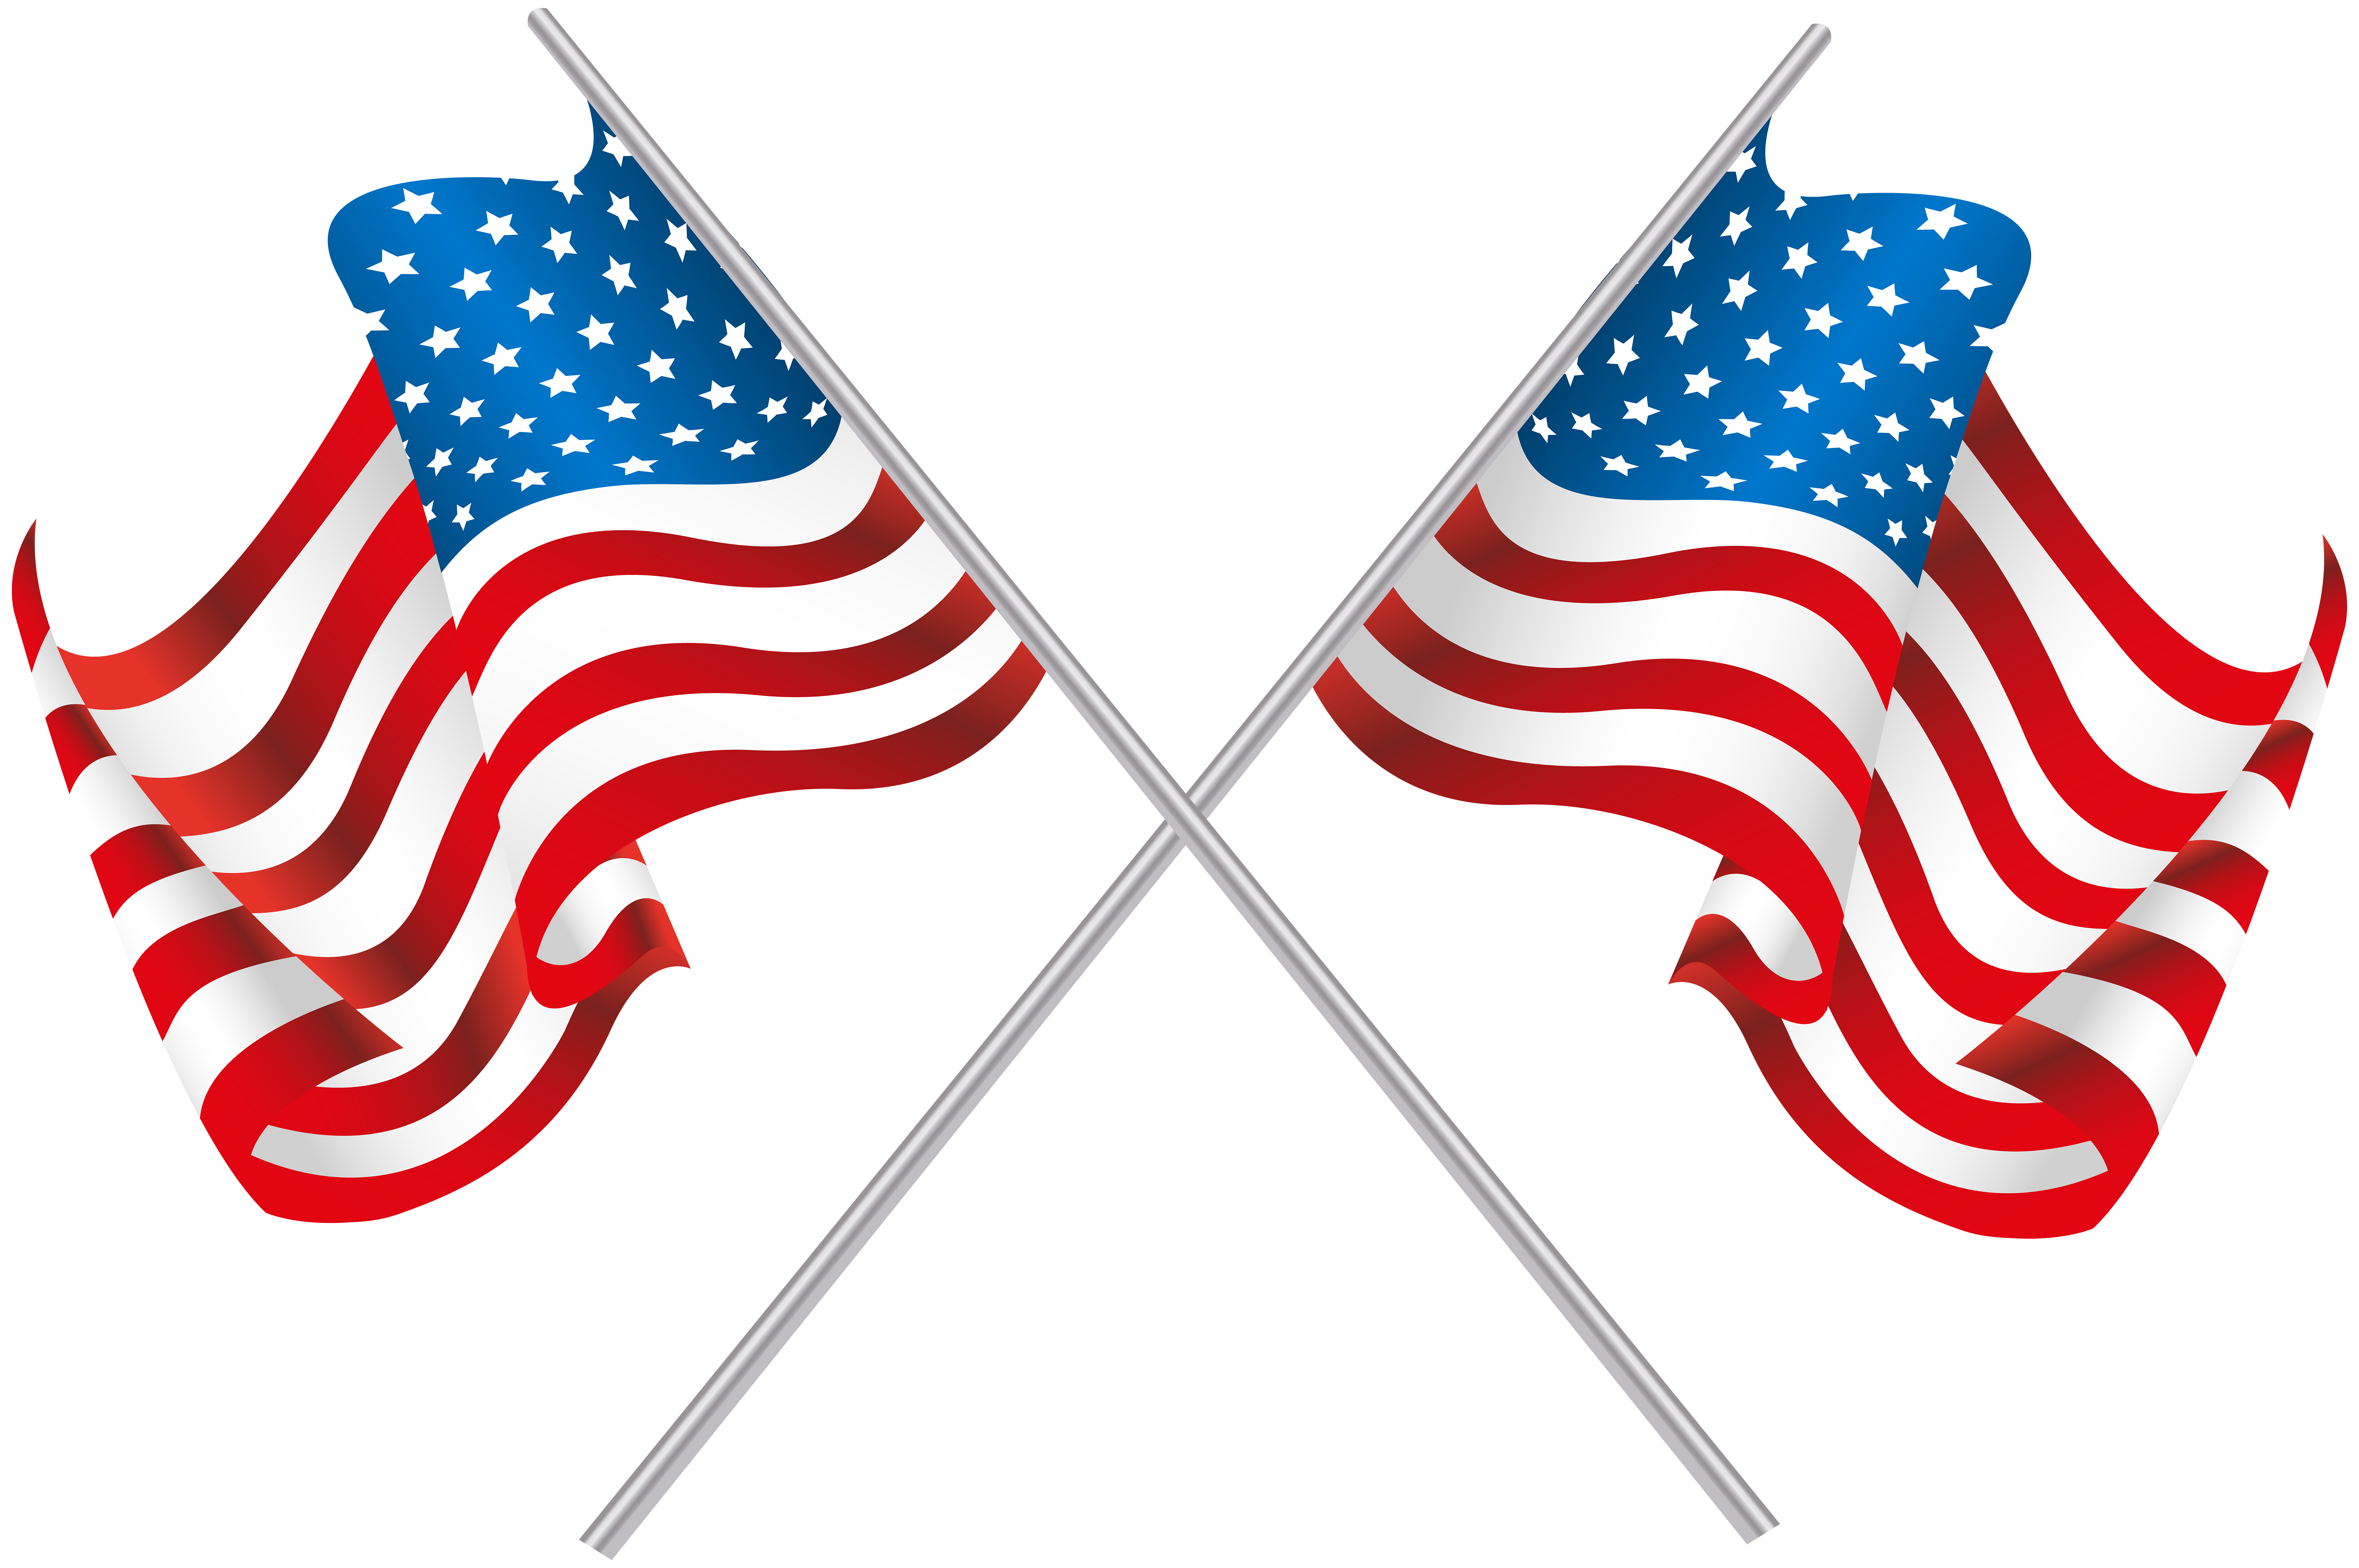 USA Crossed Flags PNG Clip Art Image | Gallery ...